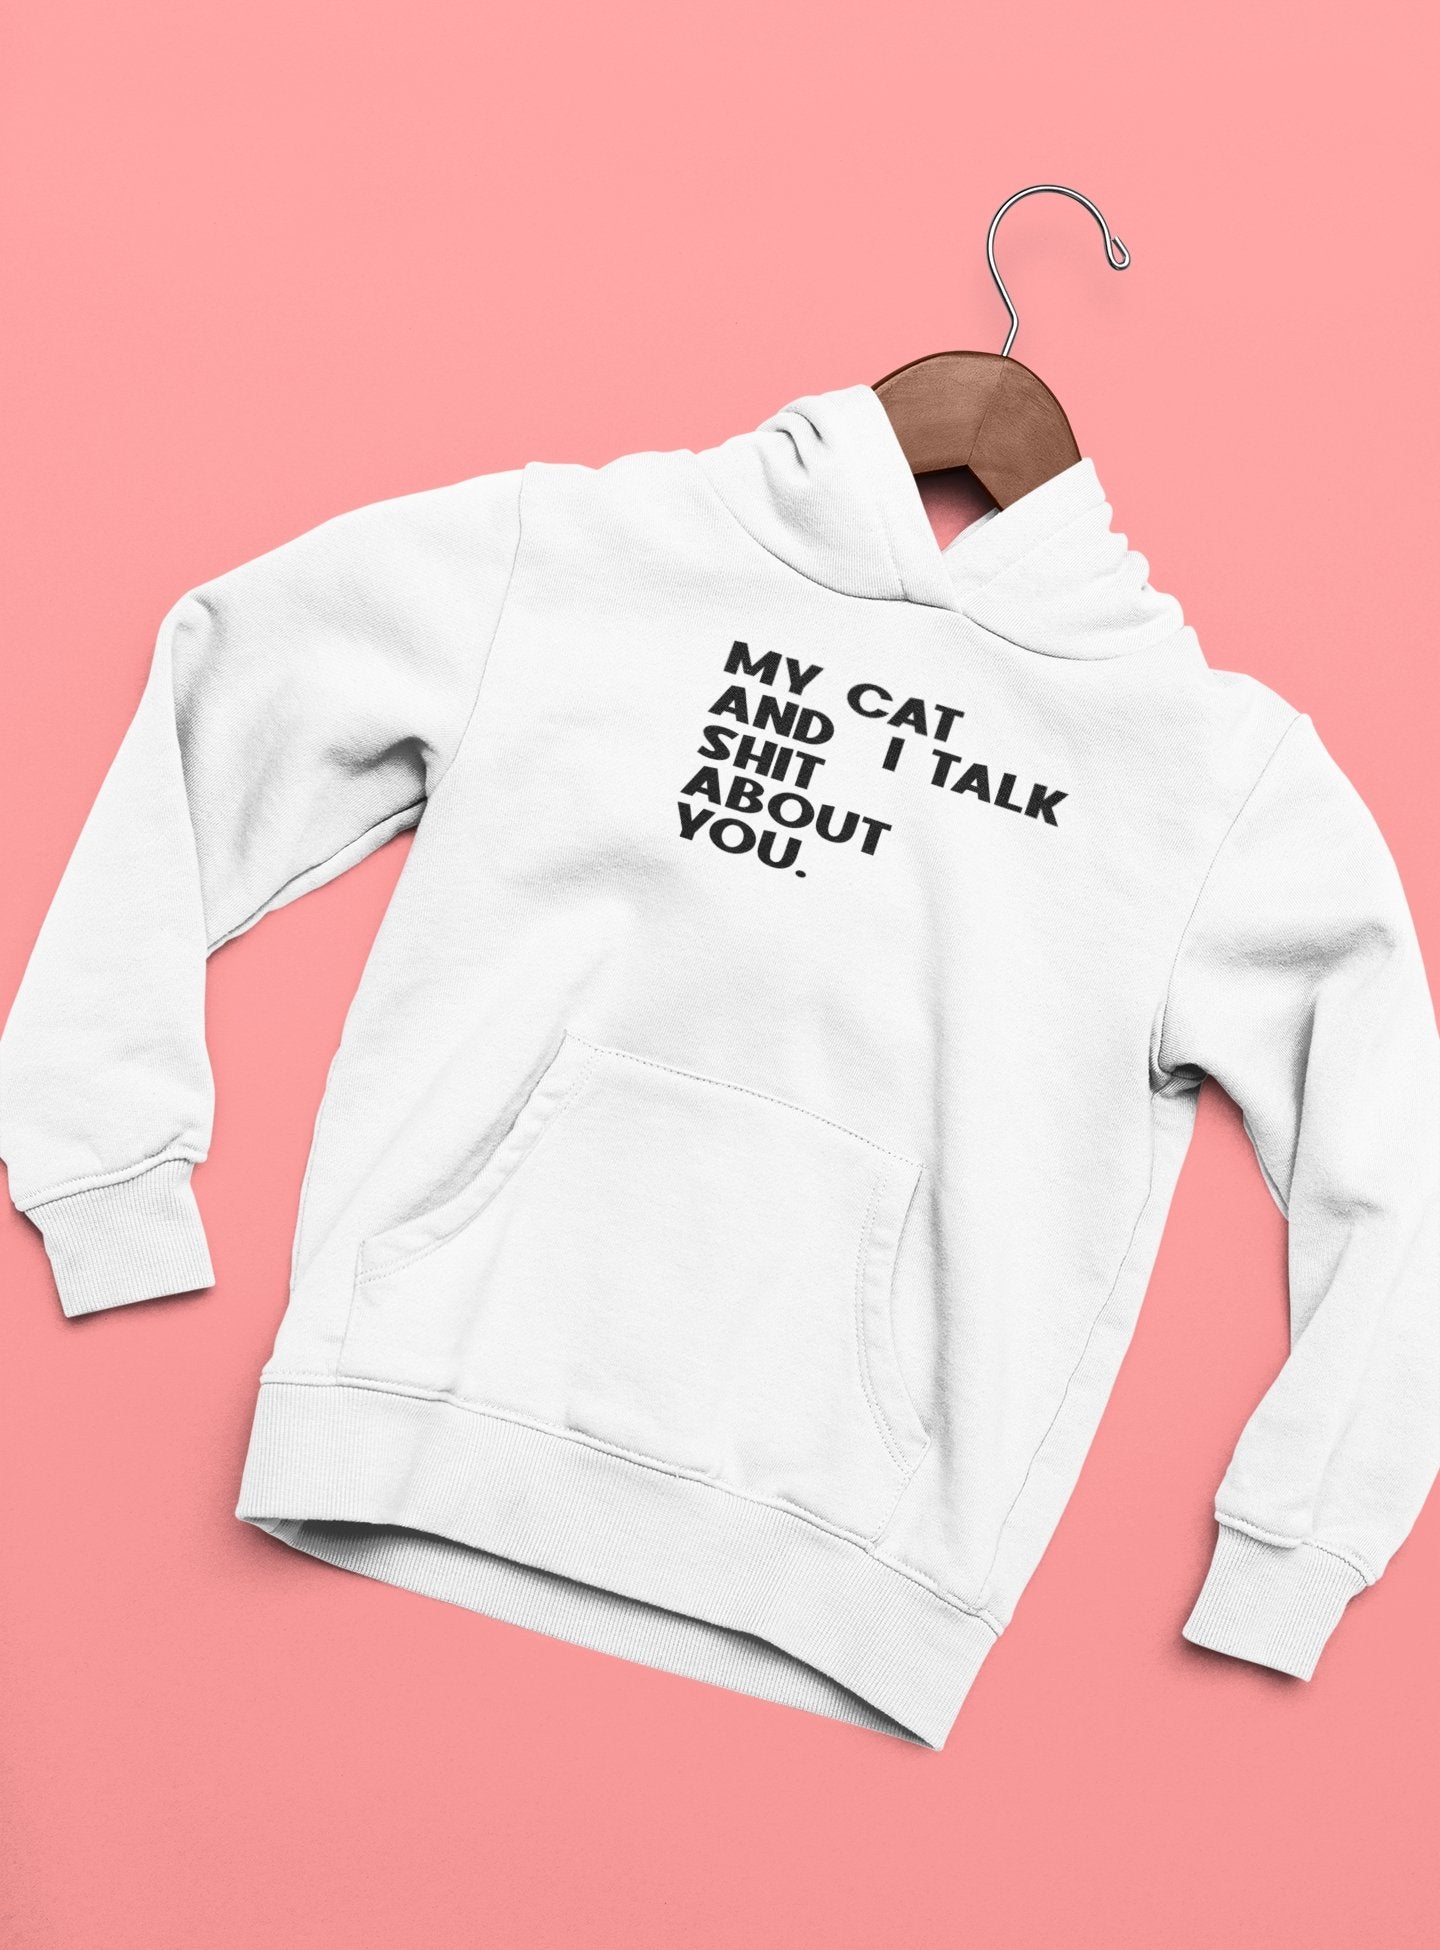 My Cat And I Talk Shit About You Hoodies for Women-FunkyTeesClub - Funky Tees Club